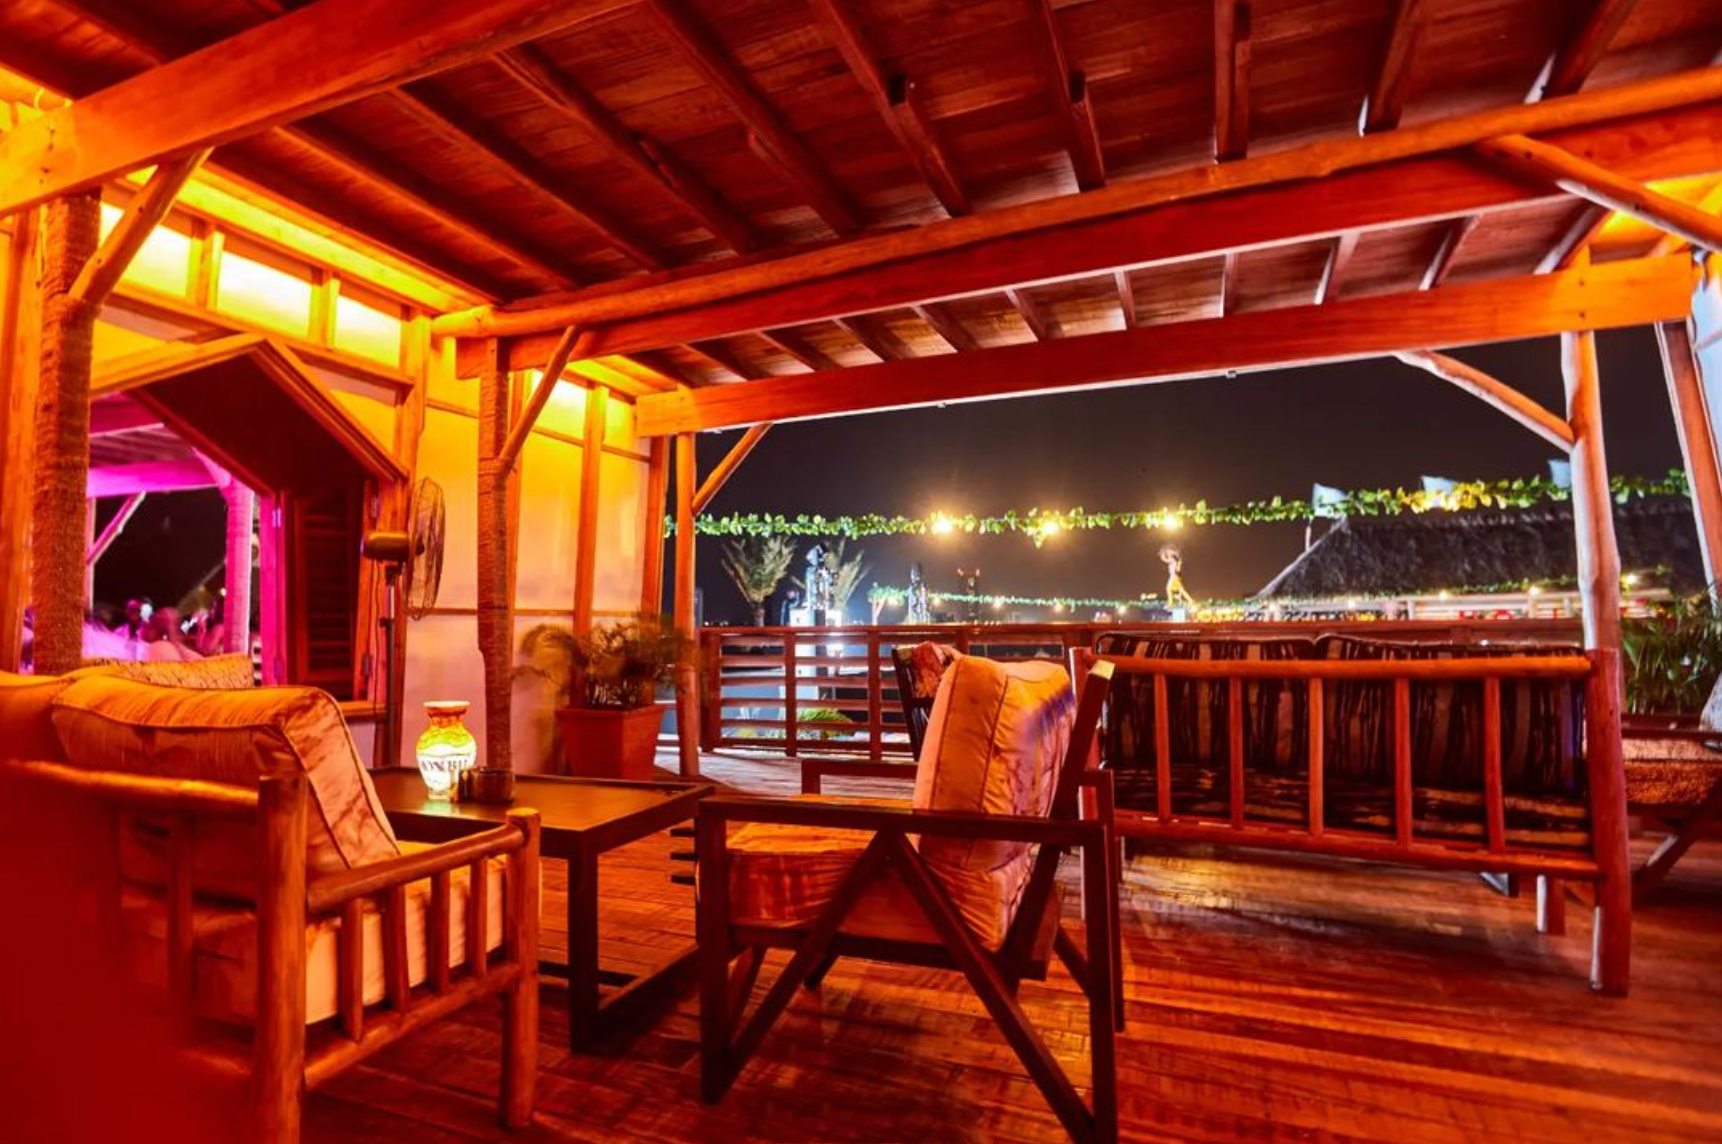 The best bars in Lagos, Nigeria | red-lit wooden interiors at Moist Beach Club